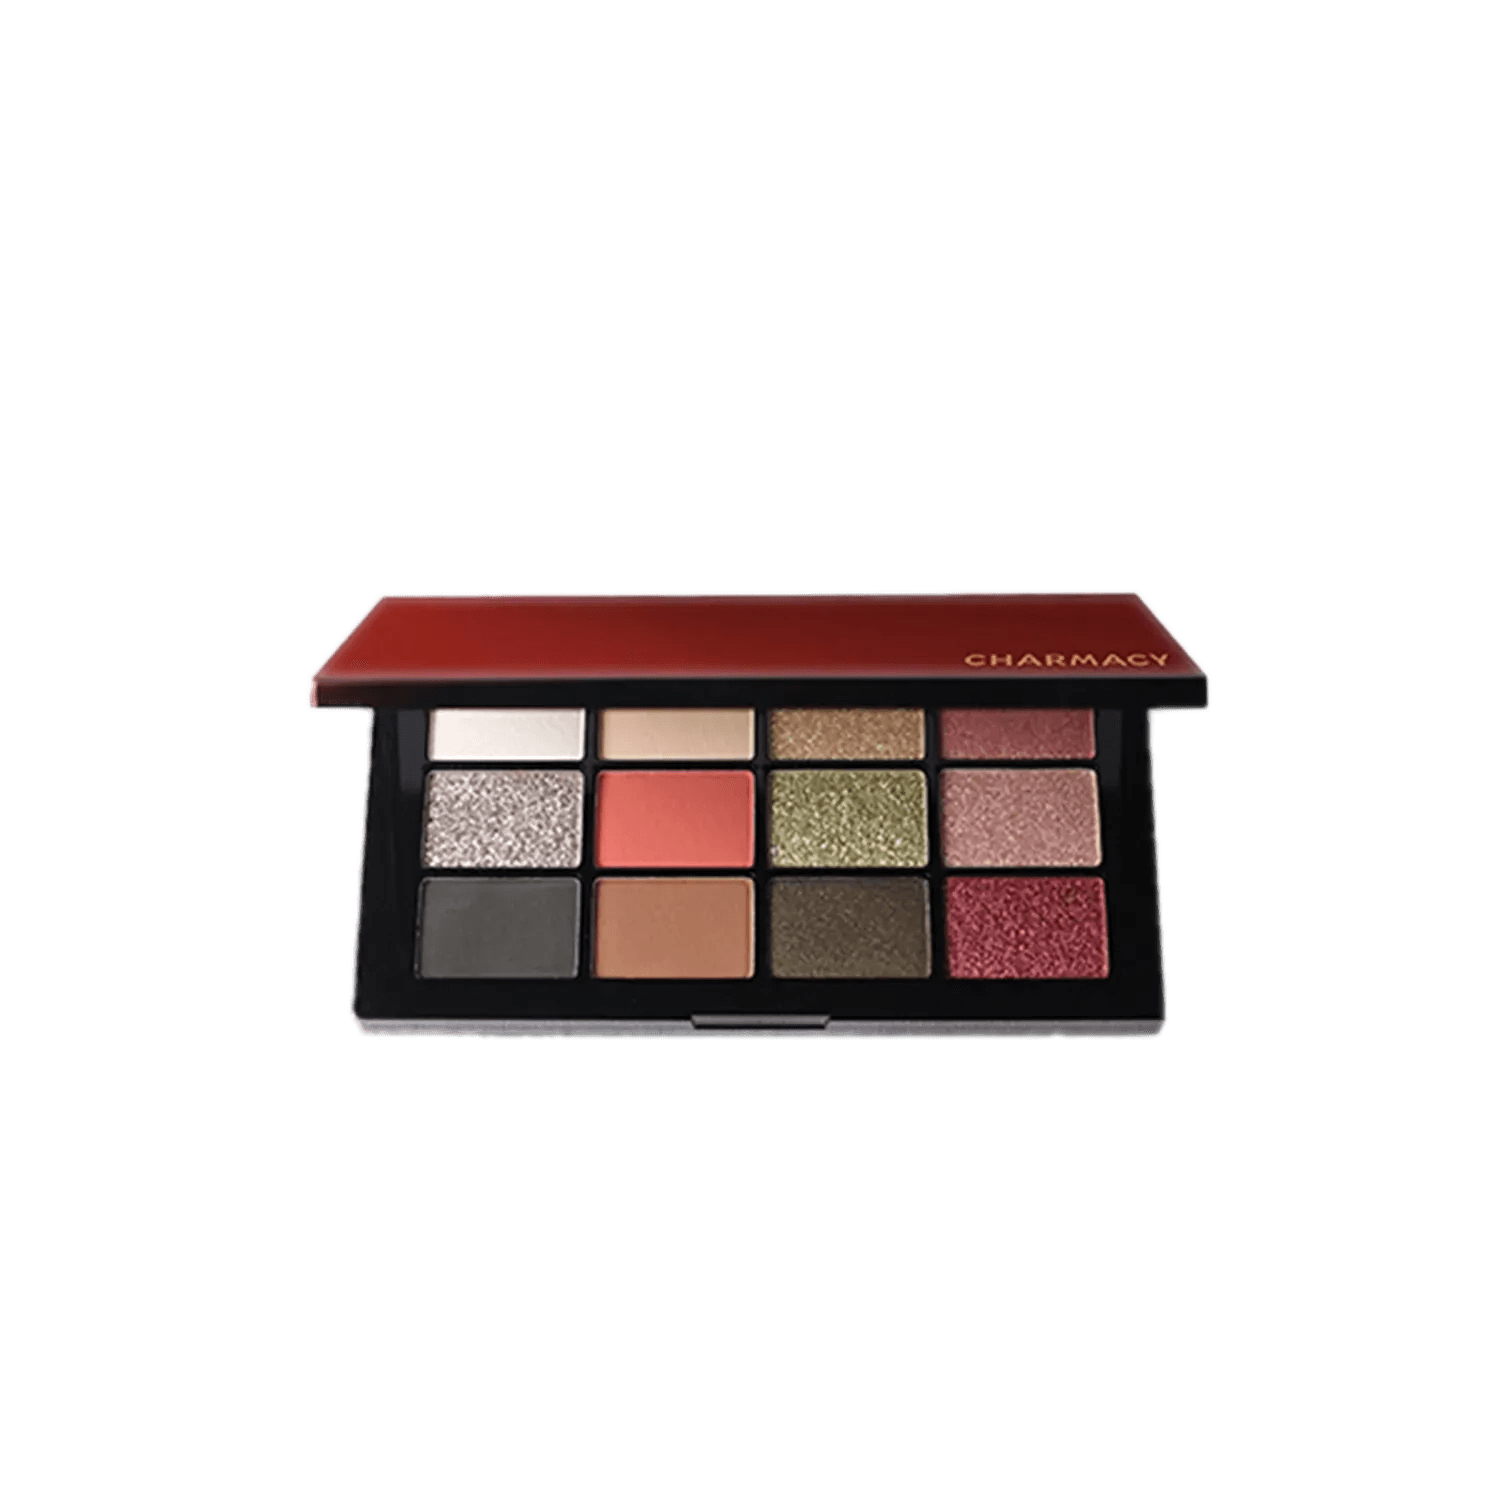 Charmacy Milano Eyeshadow 12 colors palette - (10gm)